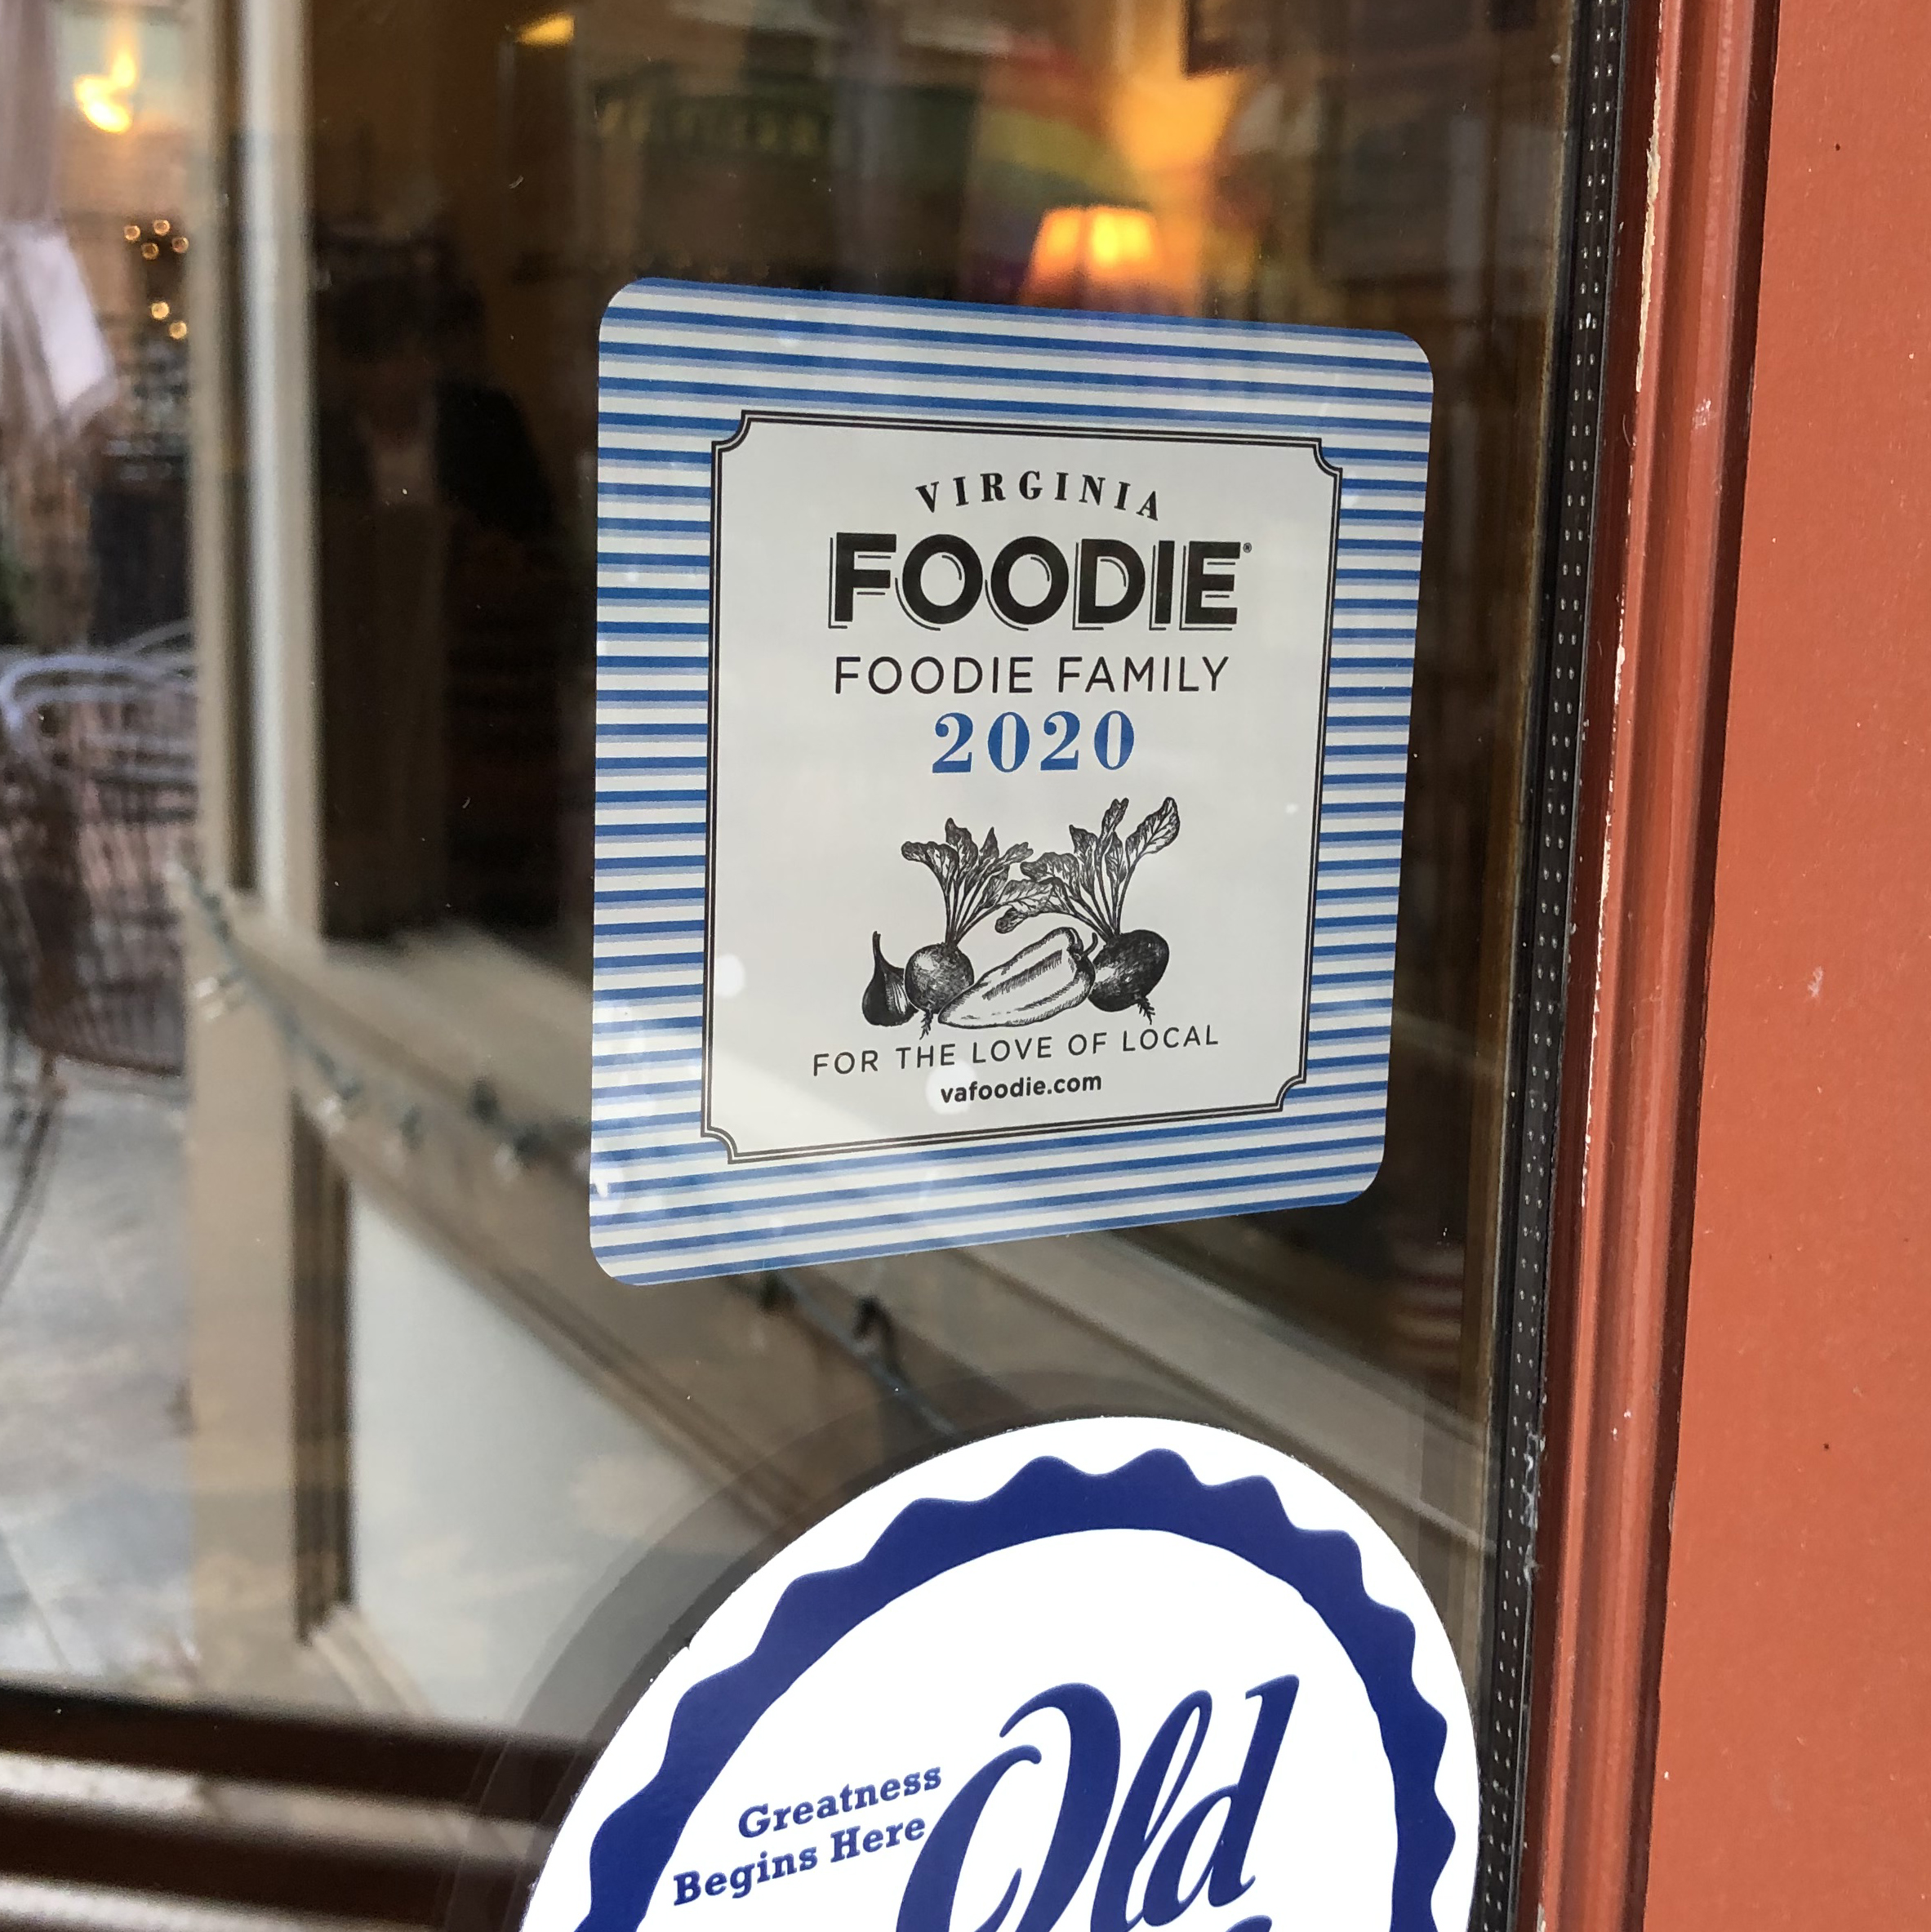 Virginia Foodie Family window clings identify local businesses who participate in the Foodie Family.